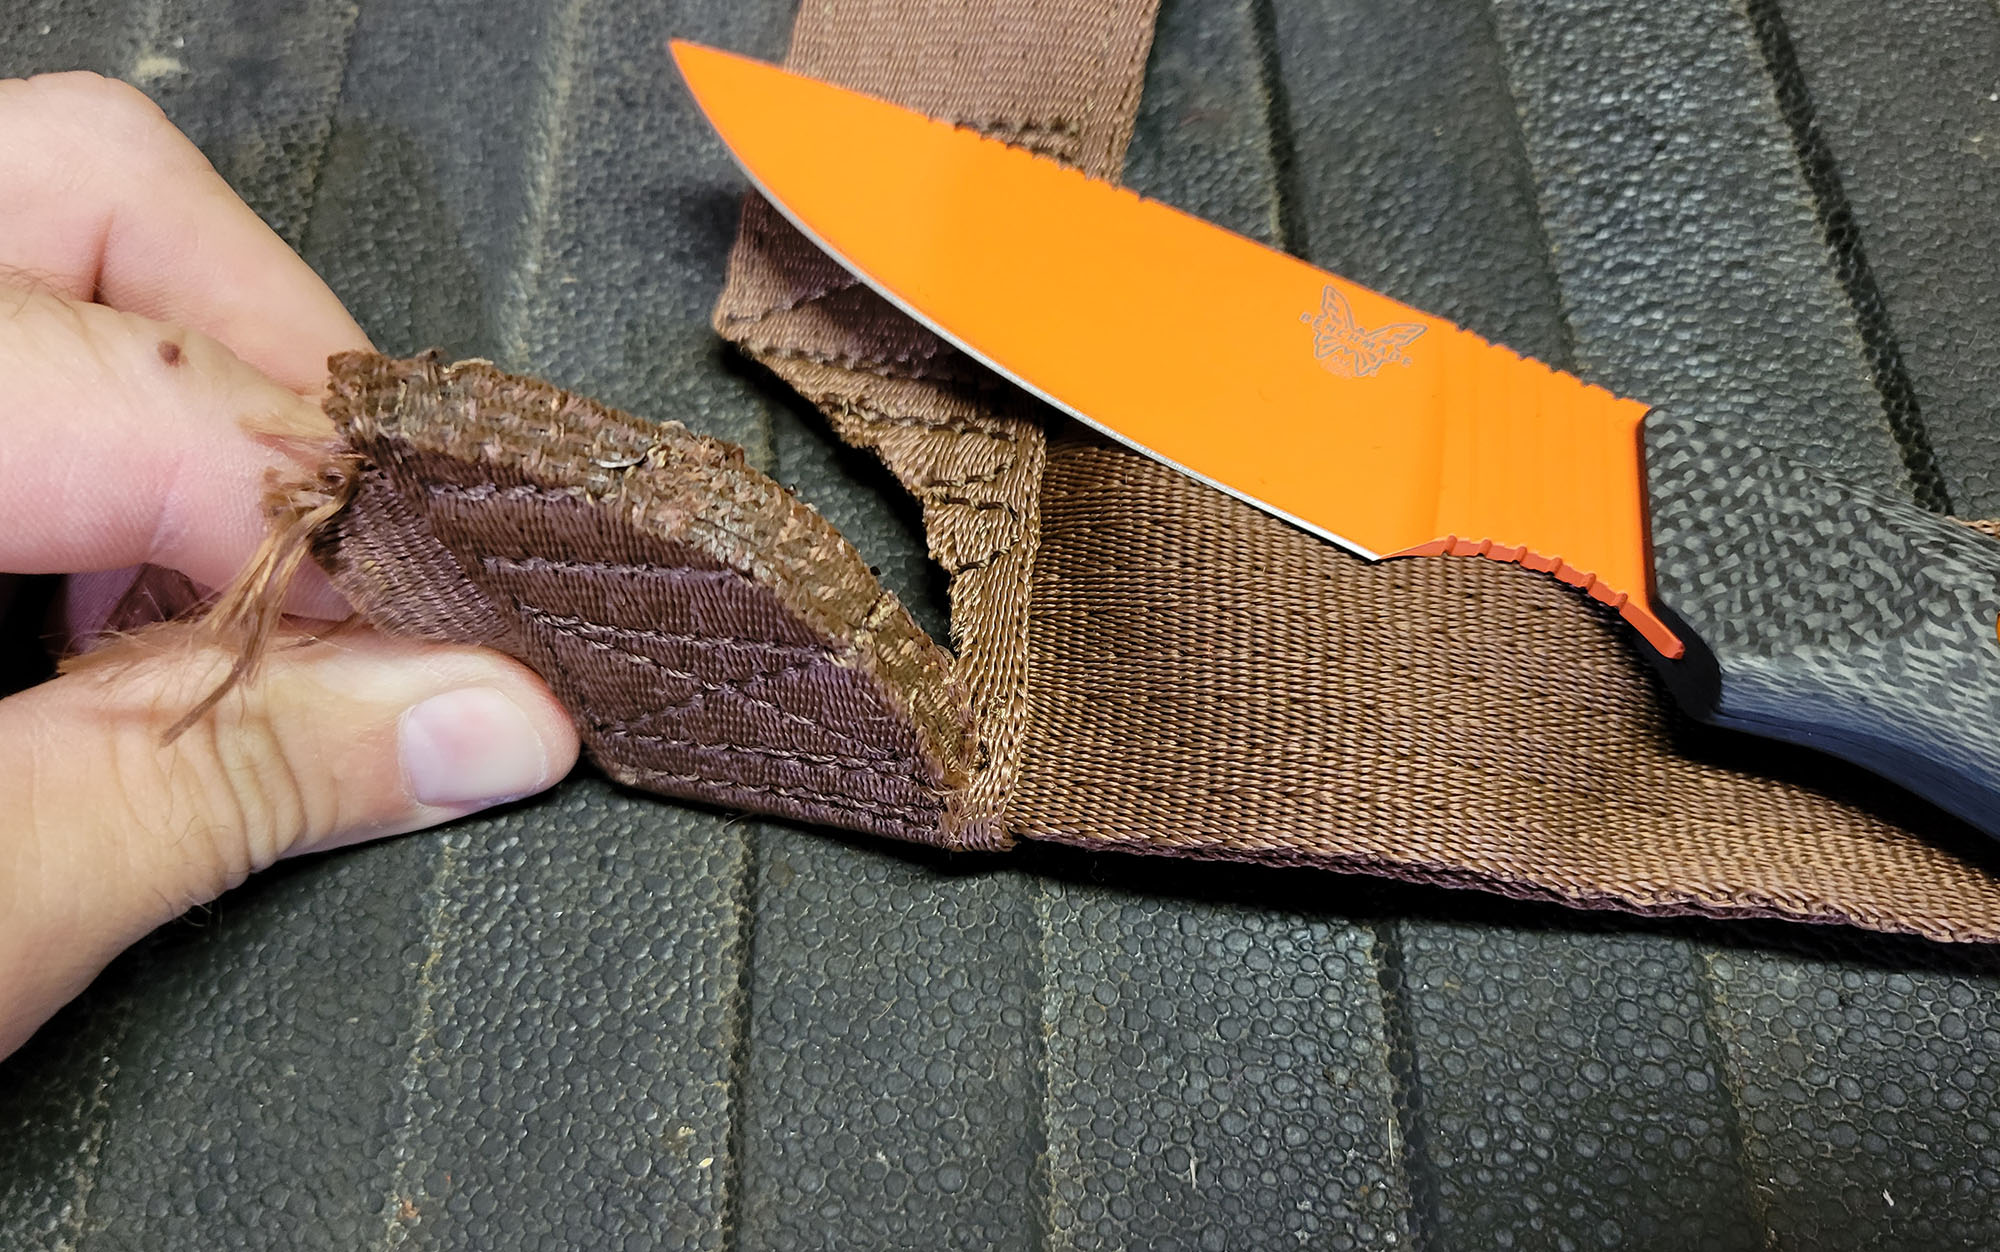 We tested the Benchmade hunting fixed blade.